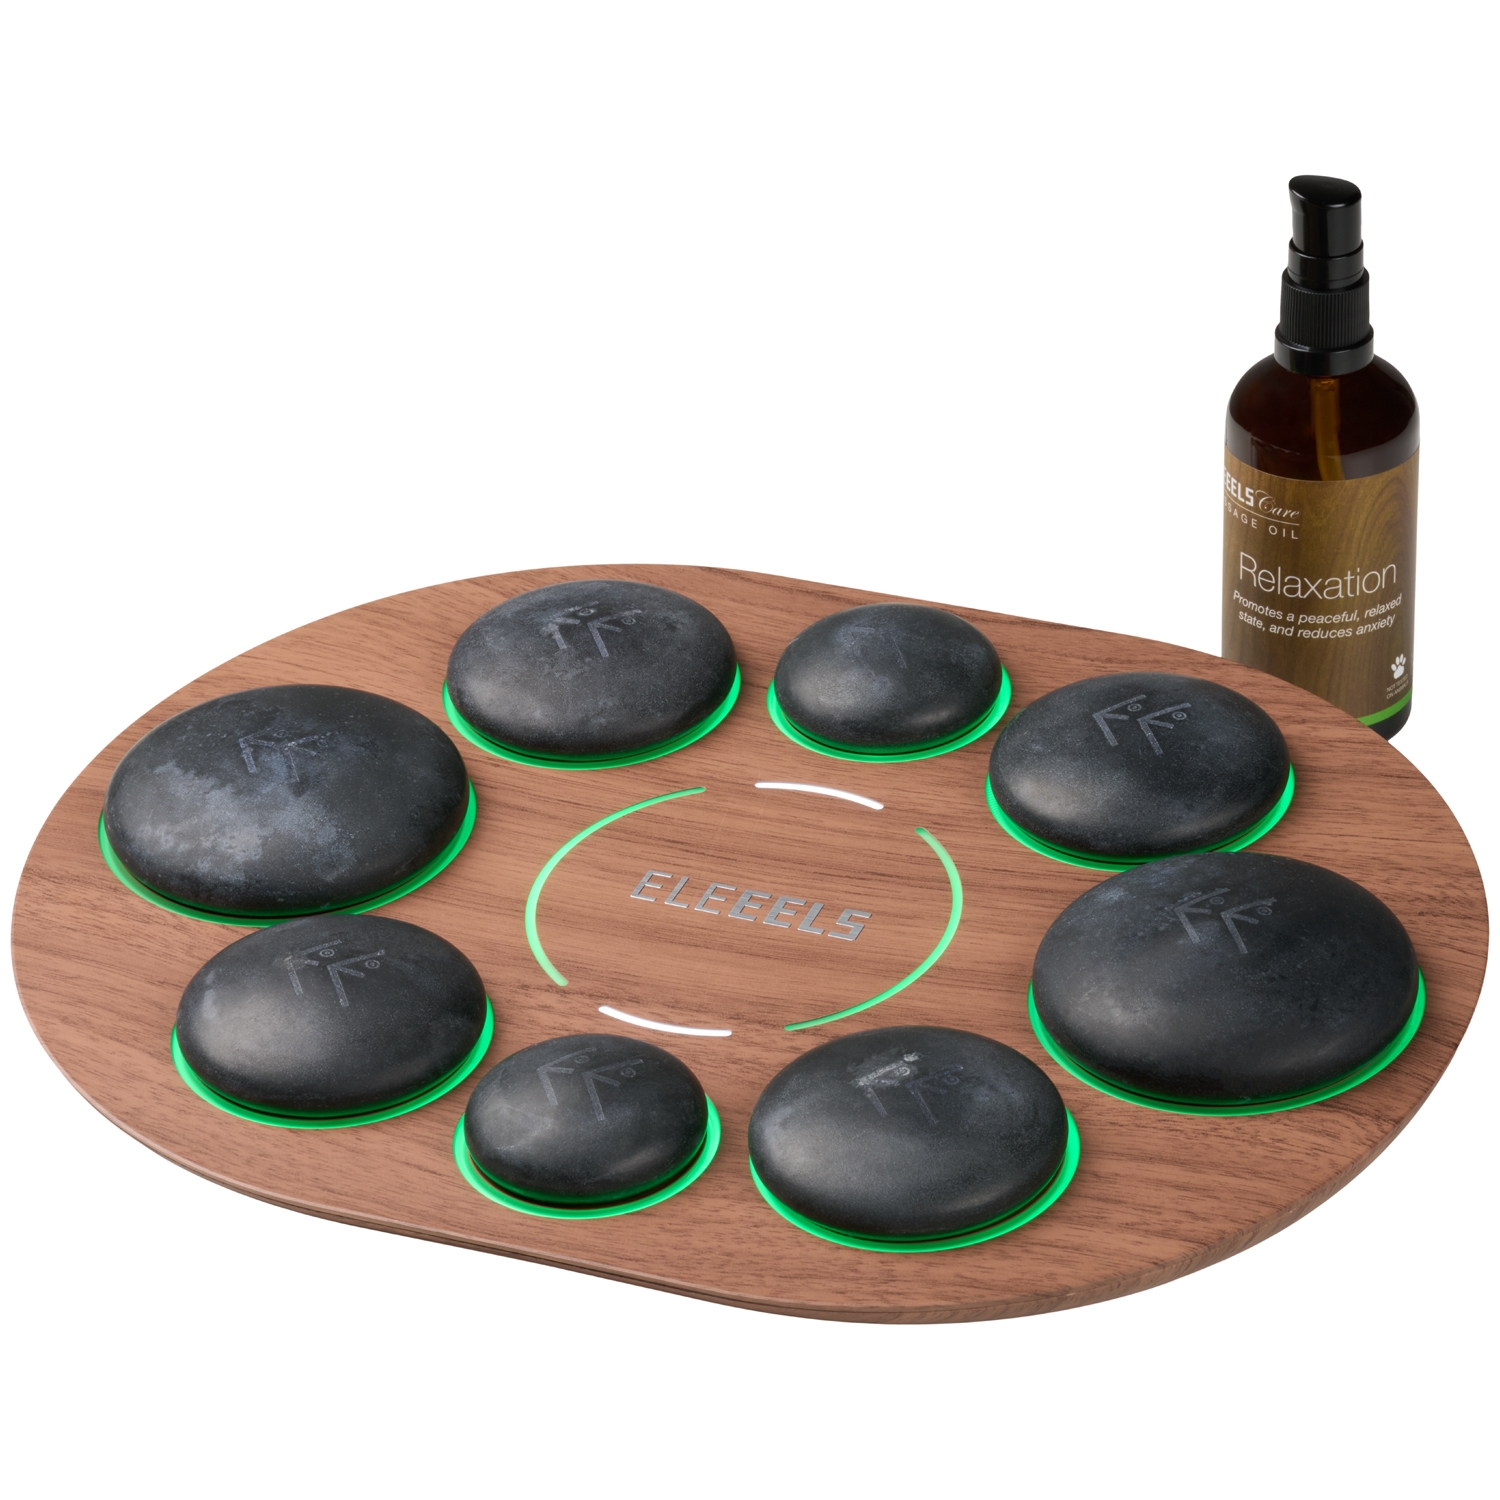 Eleeels S1 Revival Hot Stone Spa Collection    - Black